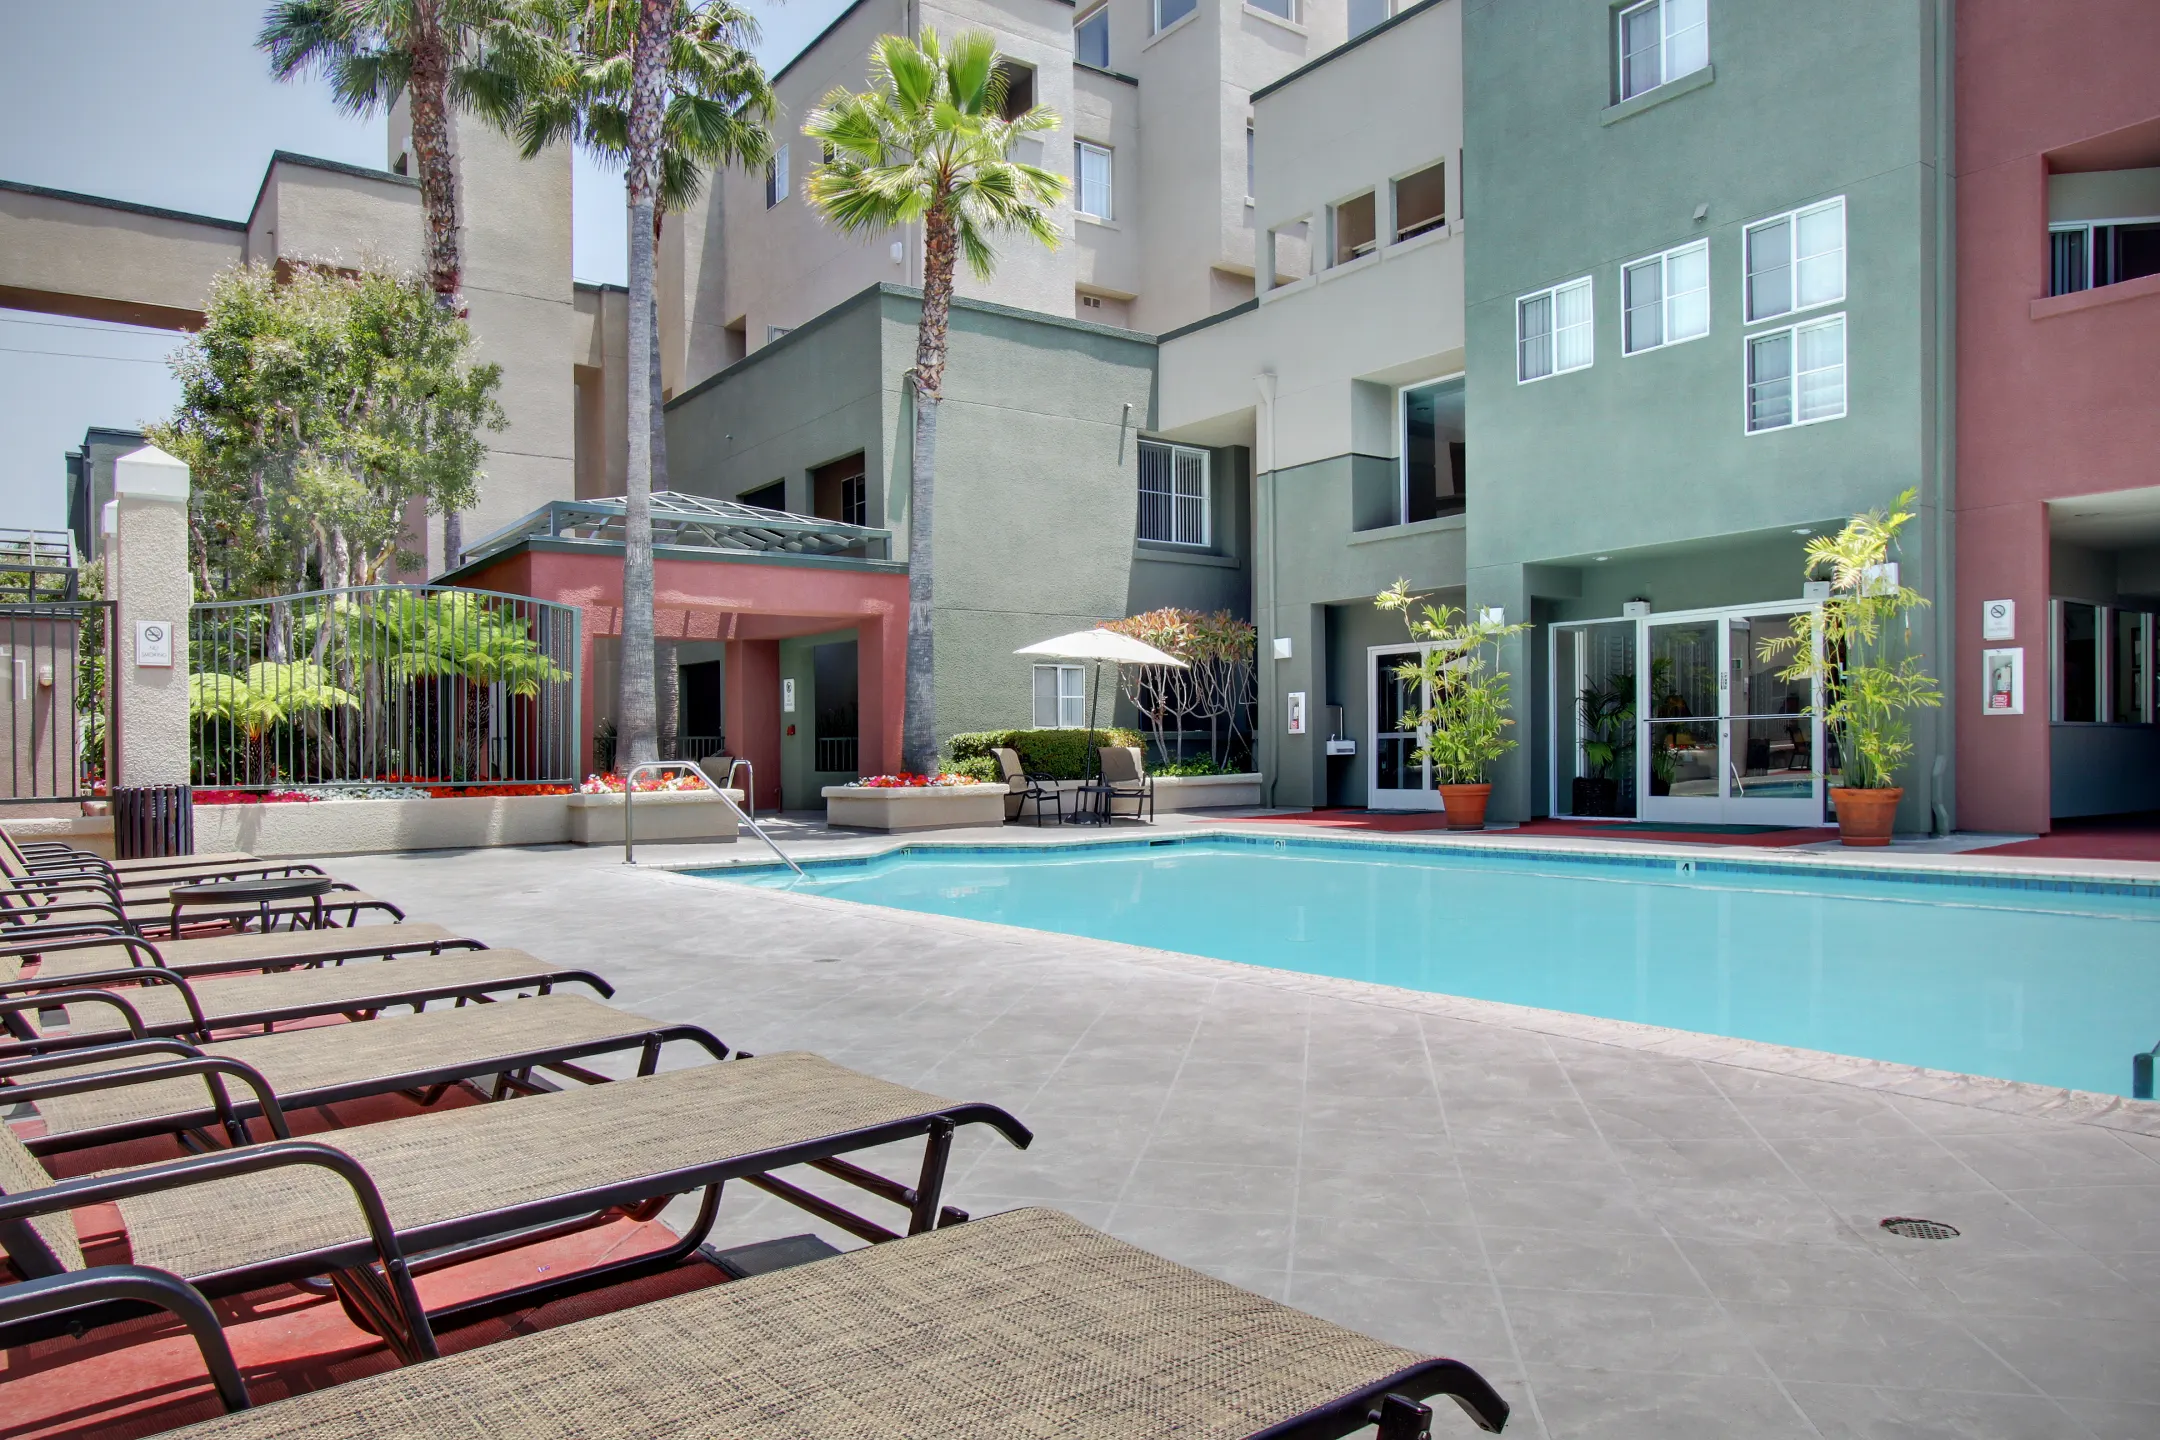 Pool - CentrePointe Apartments - Los Angeles, CA